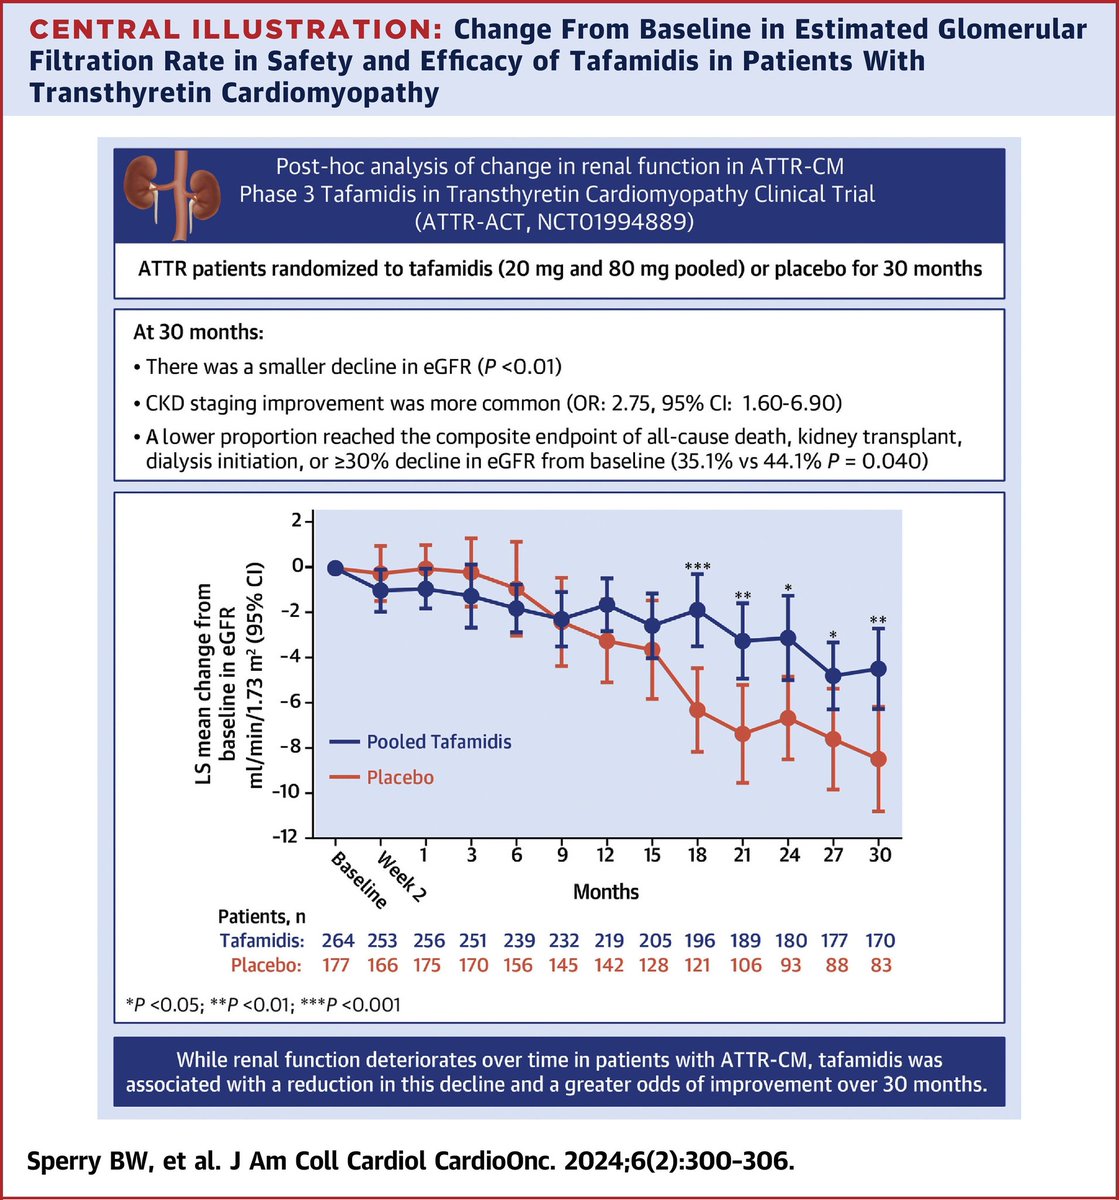 🔴 Effect of Tafamidis on Renal Function in Patients With Transthyretin Amyloid Cardiomyopathy in ATTR-ACT #openaccess @JACCJournals

sciencedirect.com/science/articl…
#cardiology #CardioTwitter #CardioEd
 #meded #cardiotwitter #MedEd #medstudent #paramedic #Cardiology #CardioEd